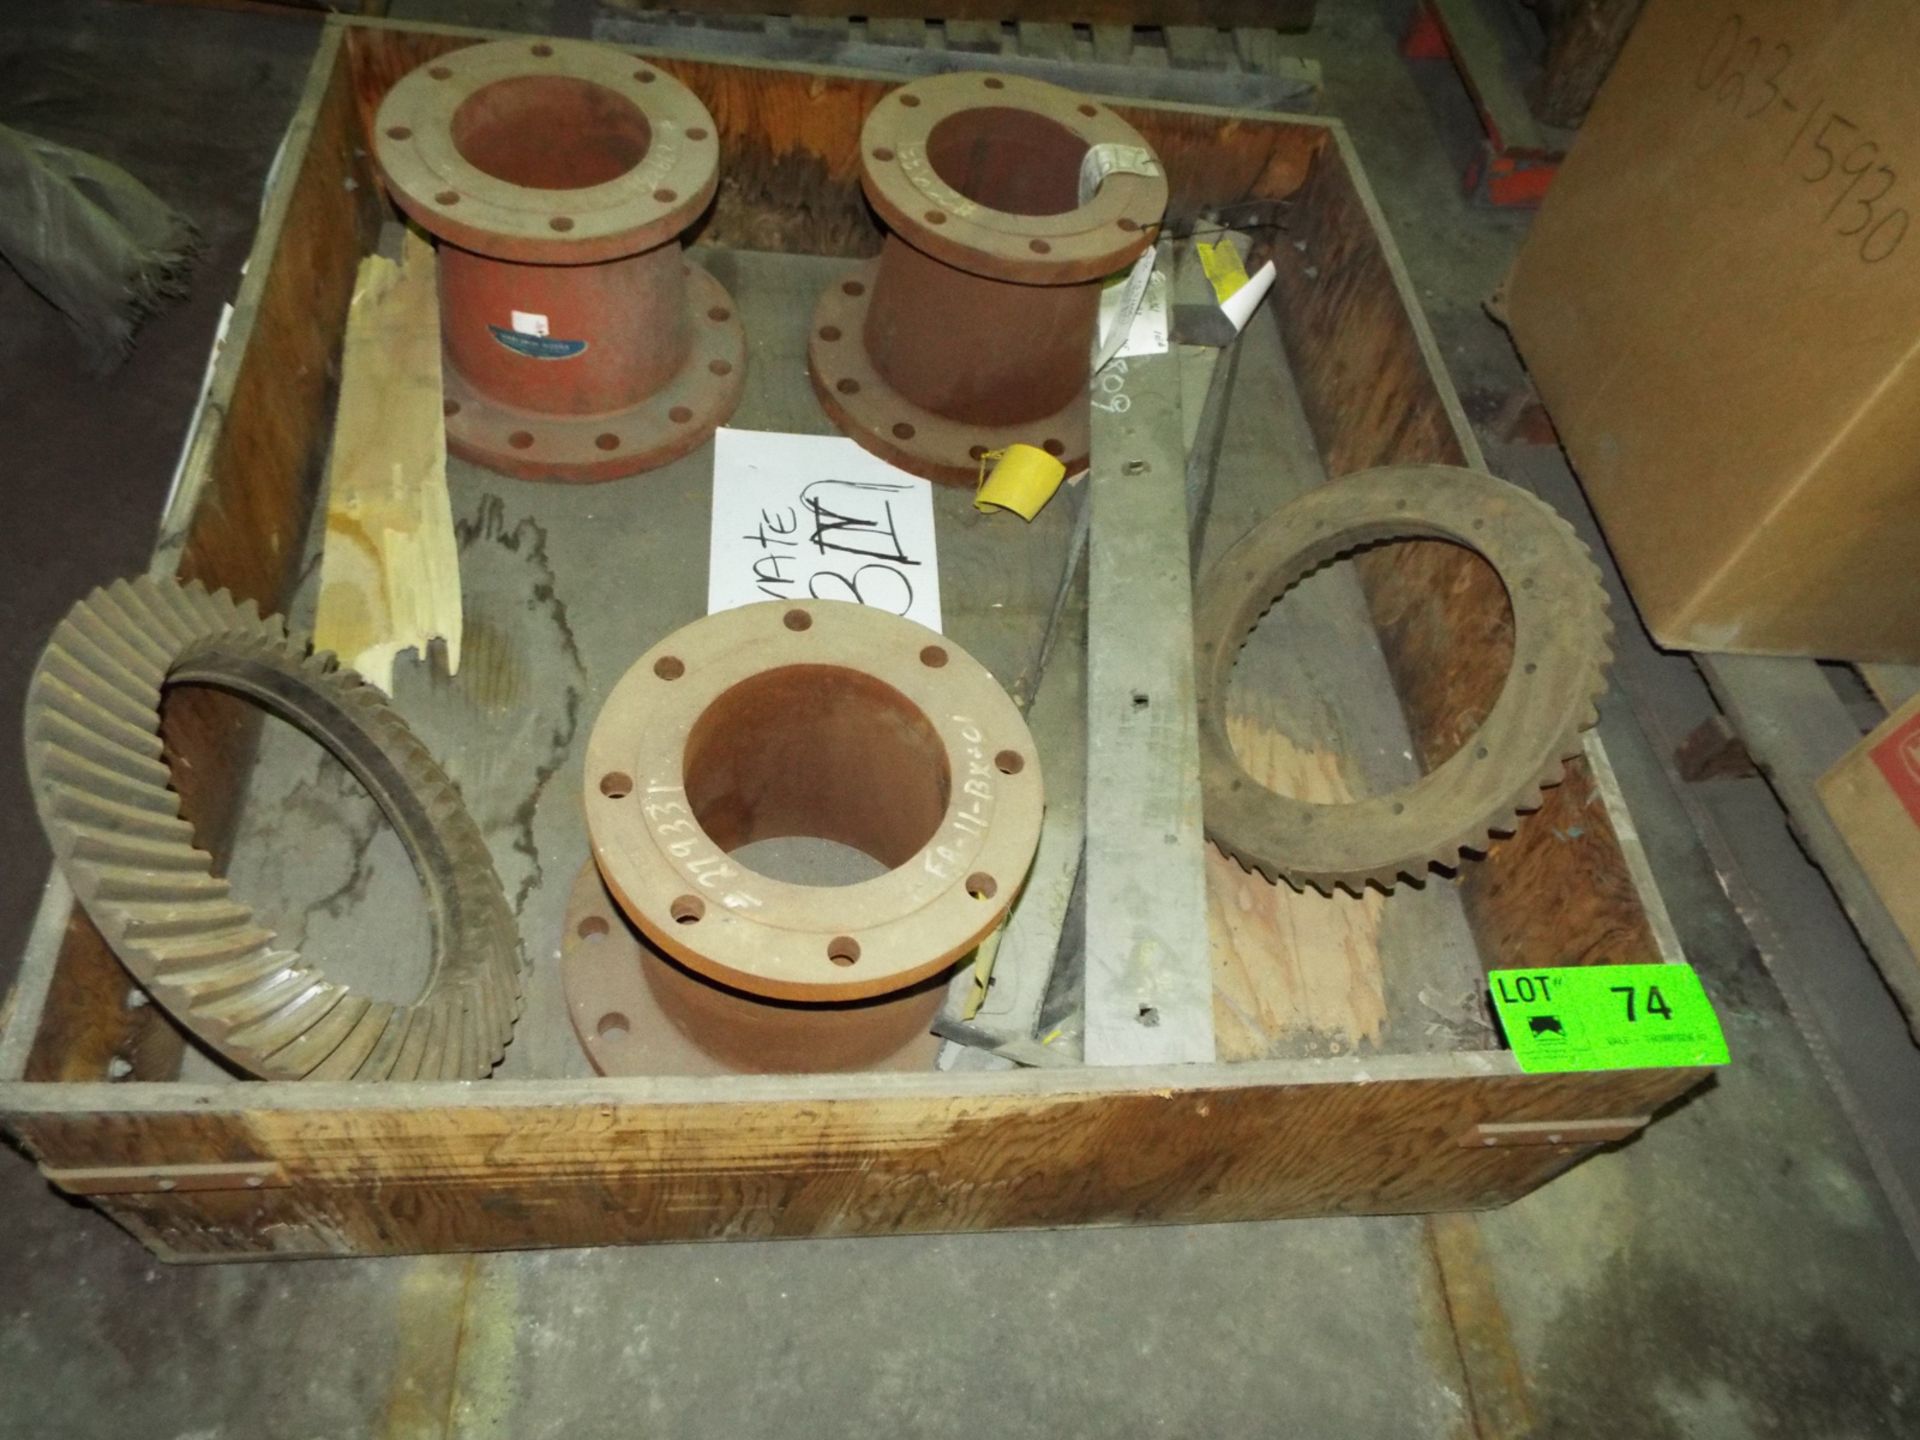 LOT/ CONTENTS OF SKID - (3) 10" TO 8" PIPE REDUCERS, (3) TYPE WEAR PLATE LINERS, (1) TYLER WEAR